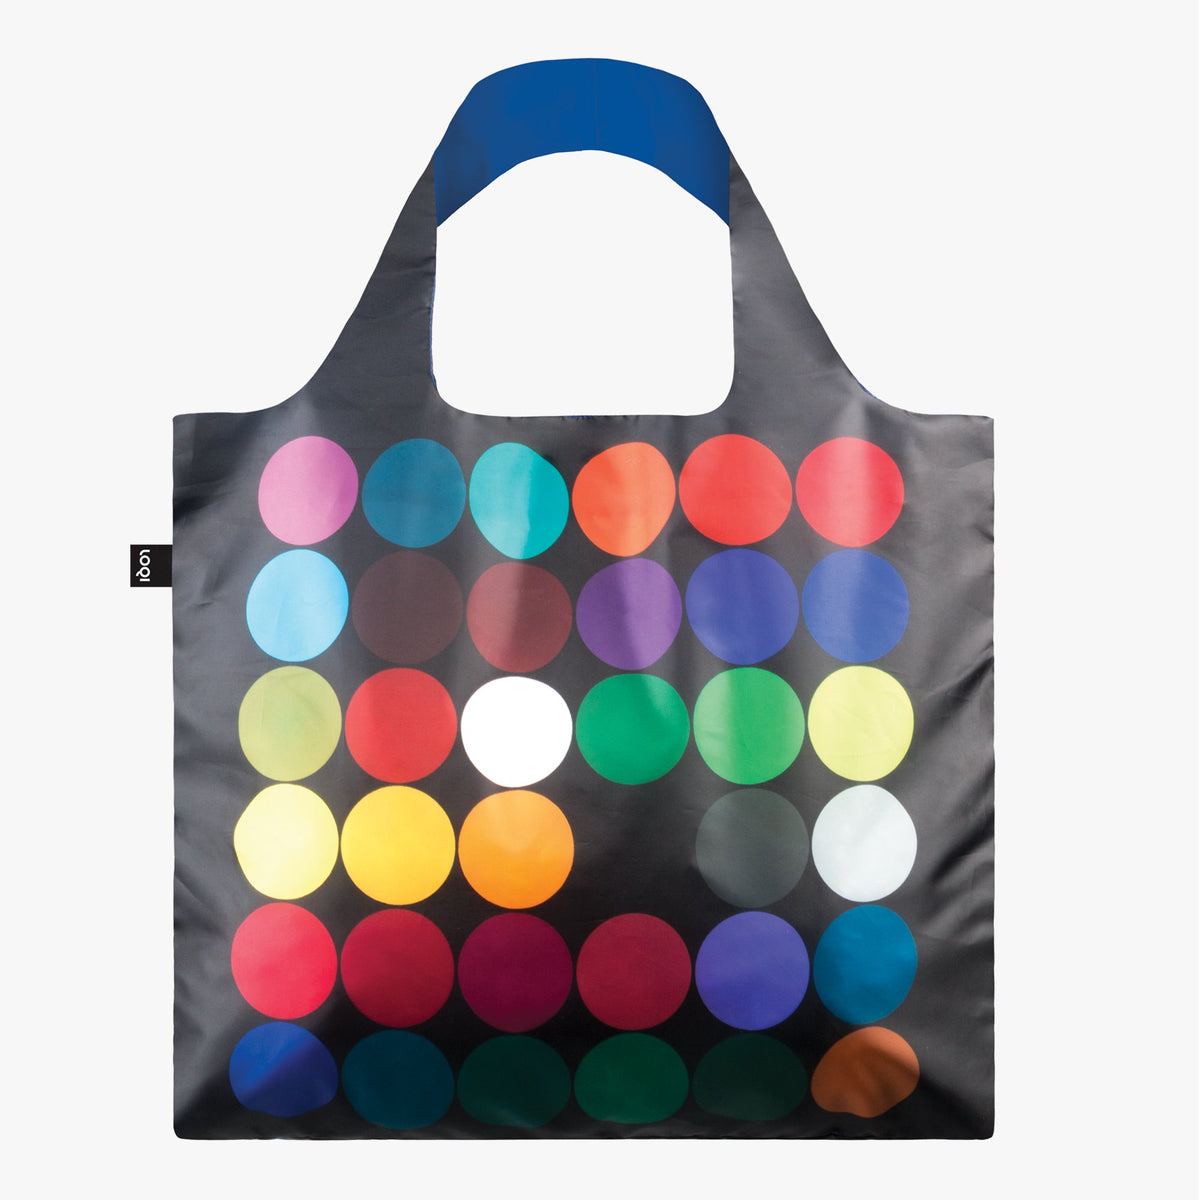 Untitled (Dots) Recycled Bag